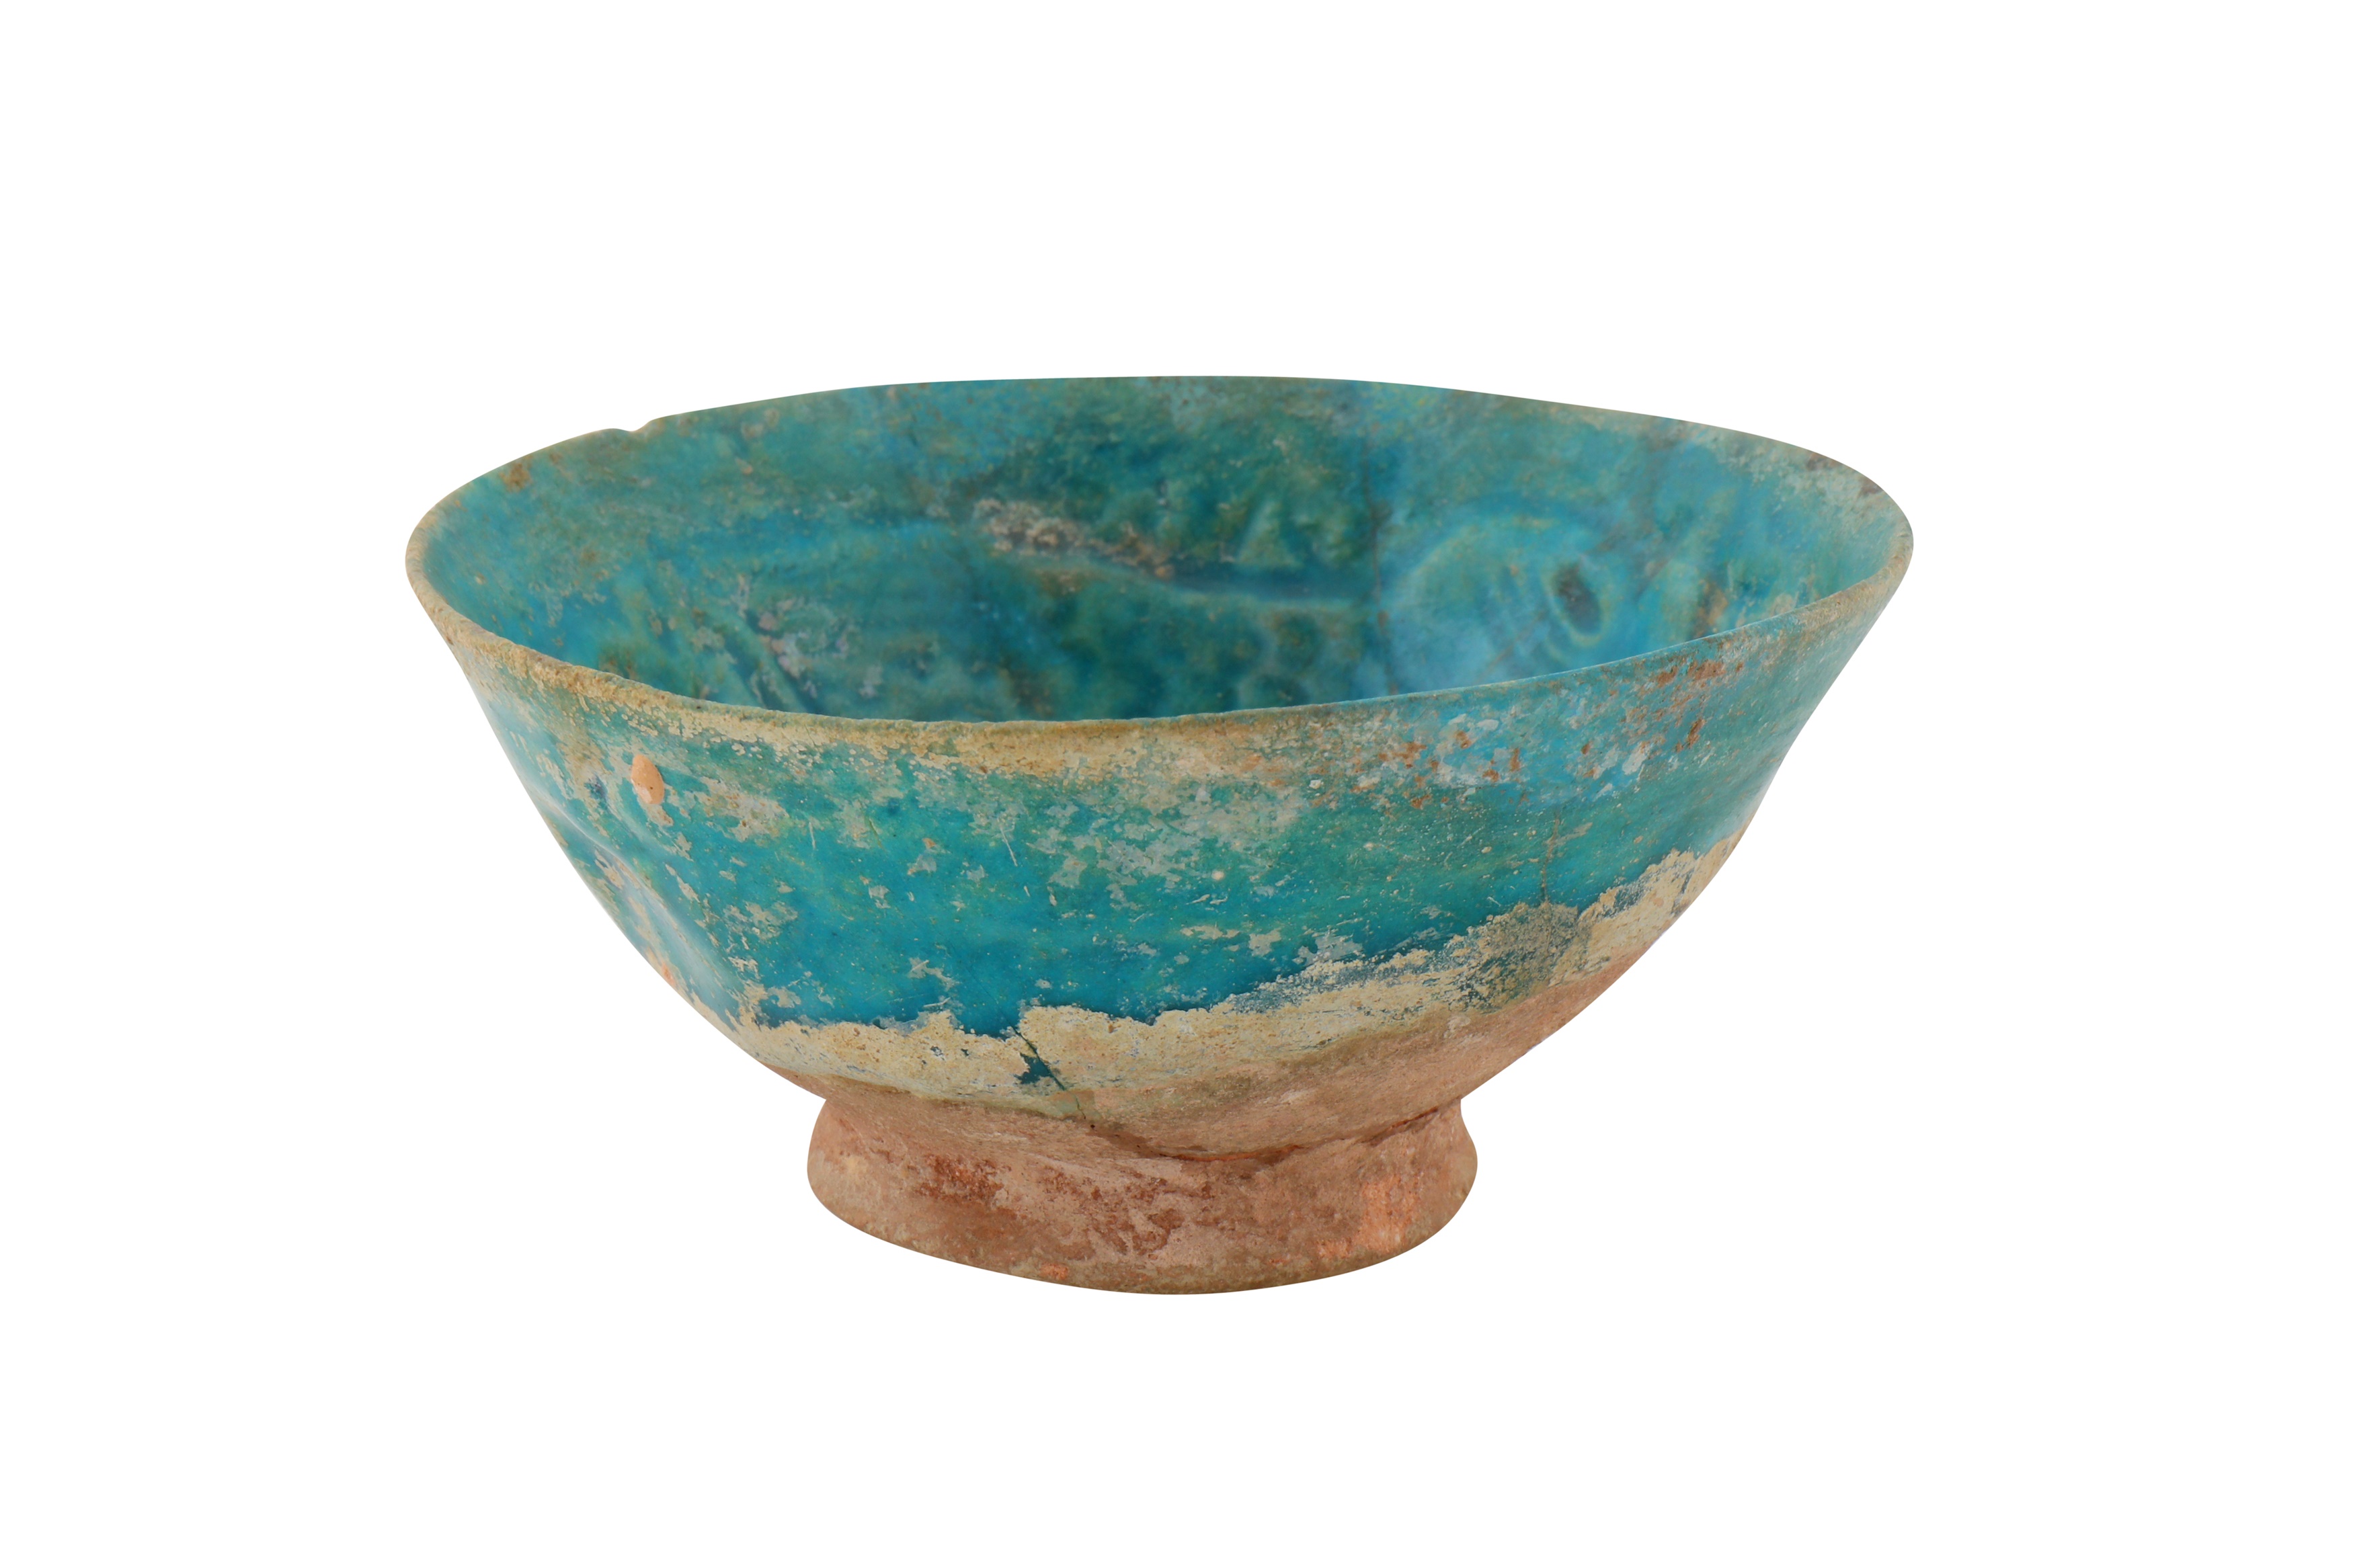 A 12TH-13TH CENTURY PERSIAN KASHAN TURQUOISE GLAZED POTTERY BOWL - Image 2 of 4